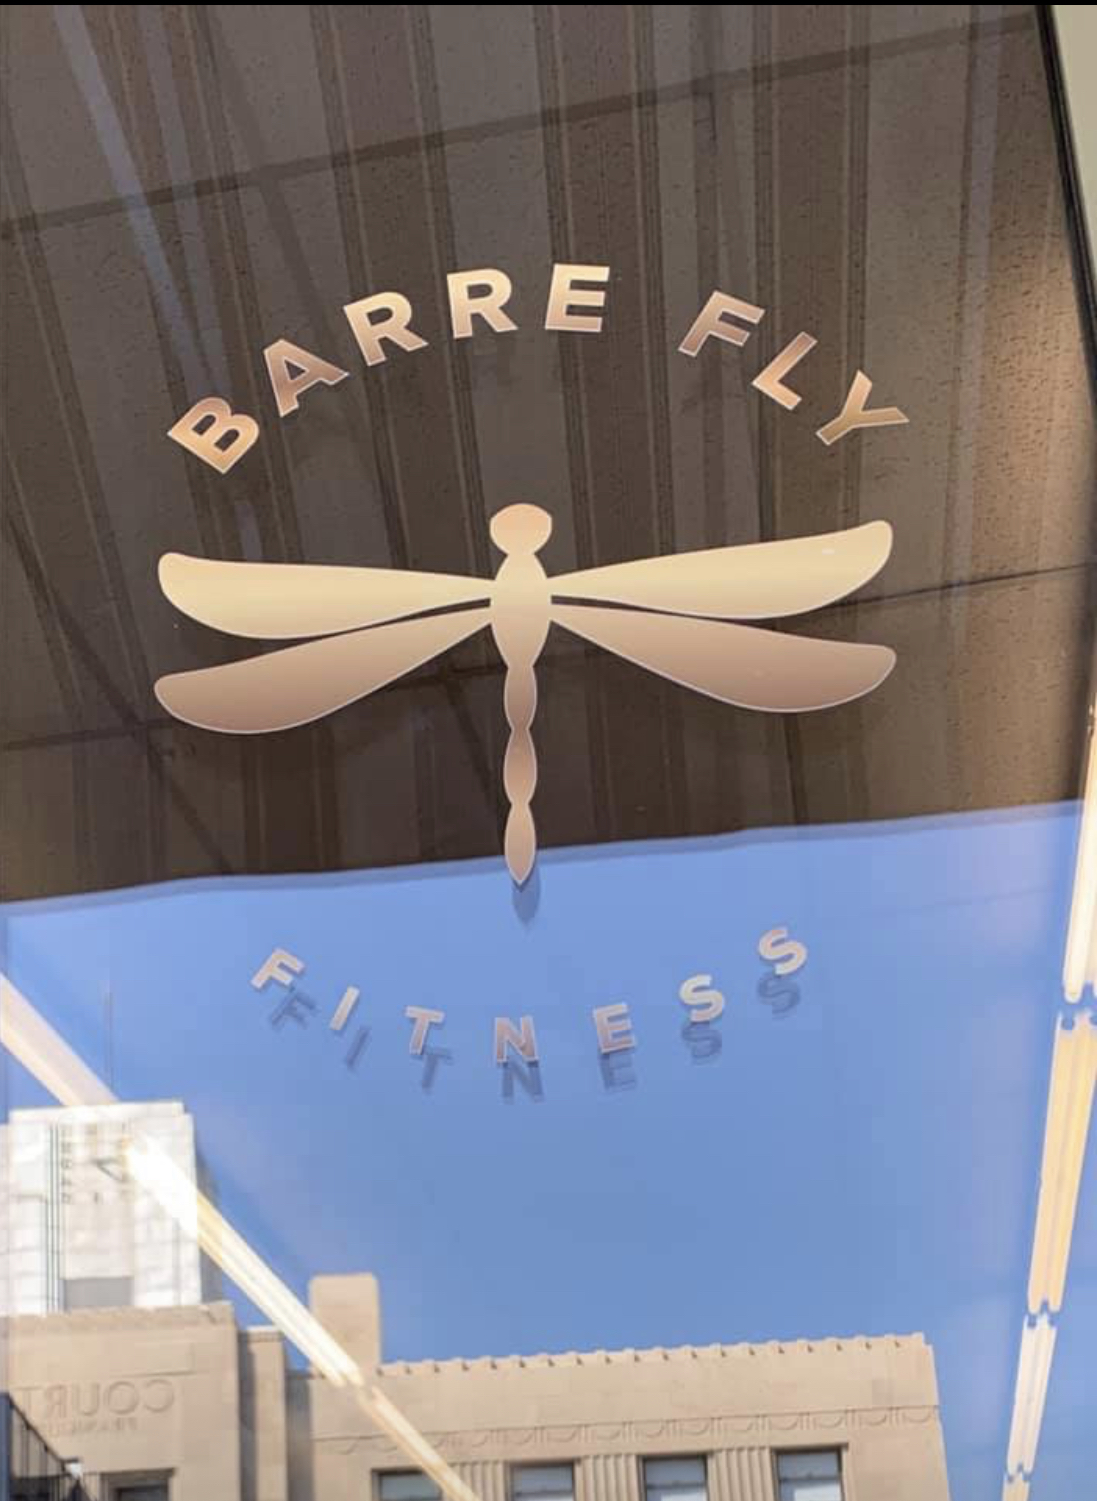 Barre Fly Fitness